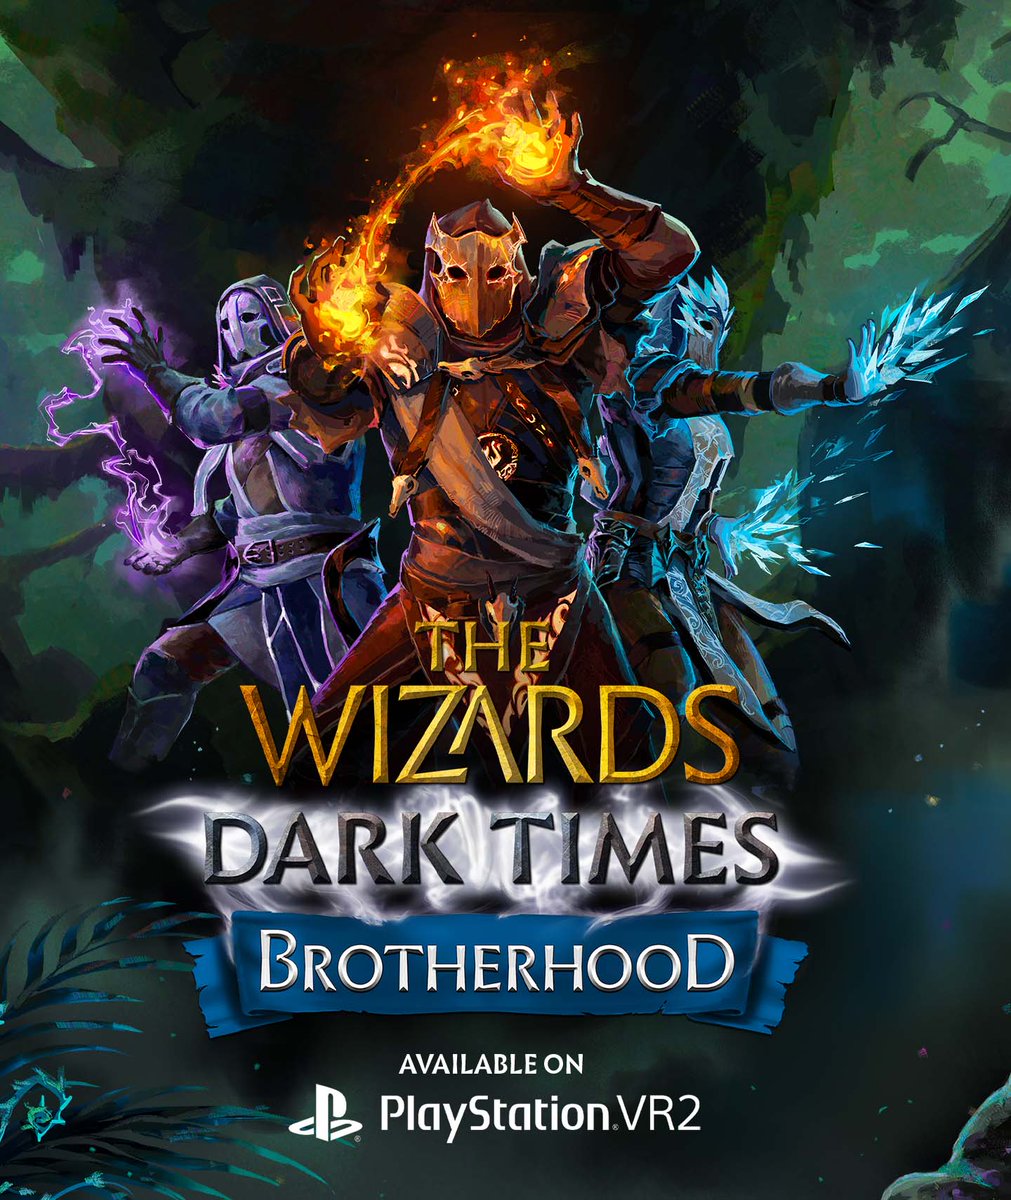 BIG NEWS! 🌟🧙‍♂️ Wizards Dark Times: Brotherhood is now available on PlayStationVR2! GET IT HERE 👉 store.playstation.com/concept/100084… Big thanks to @PlayStation 🔥 #TheWizards #VirtualReality #VR #Gaming #Playstation #PSVR2